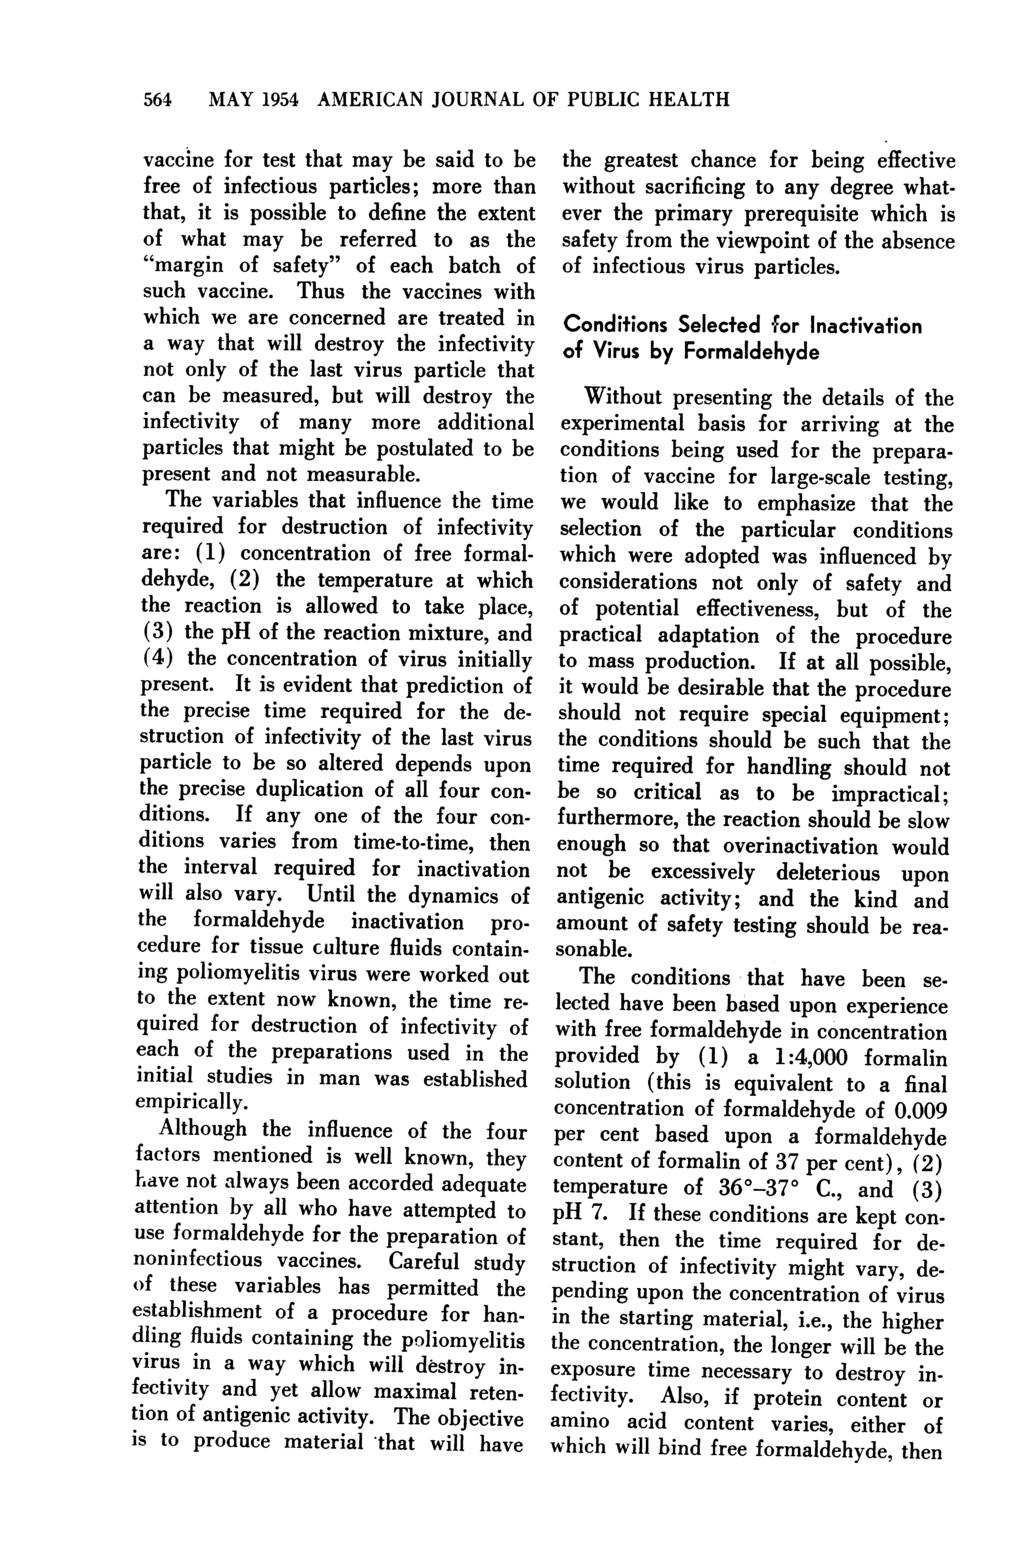 564 MAY 1954 AMERICAN JOURNAL OF PUBLIC HEALTH vaccine for test that may be said to be free of infectious particles; more than that, it is possible to define the extent of what may be referred to as